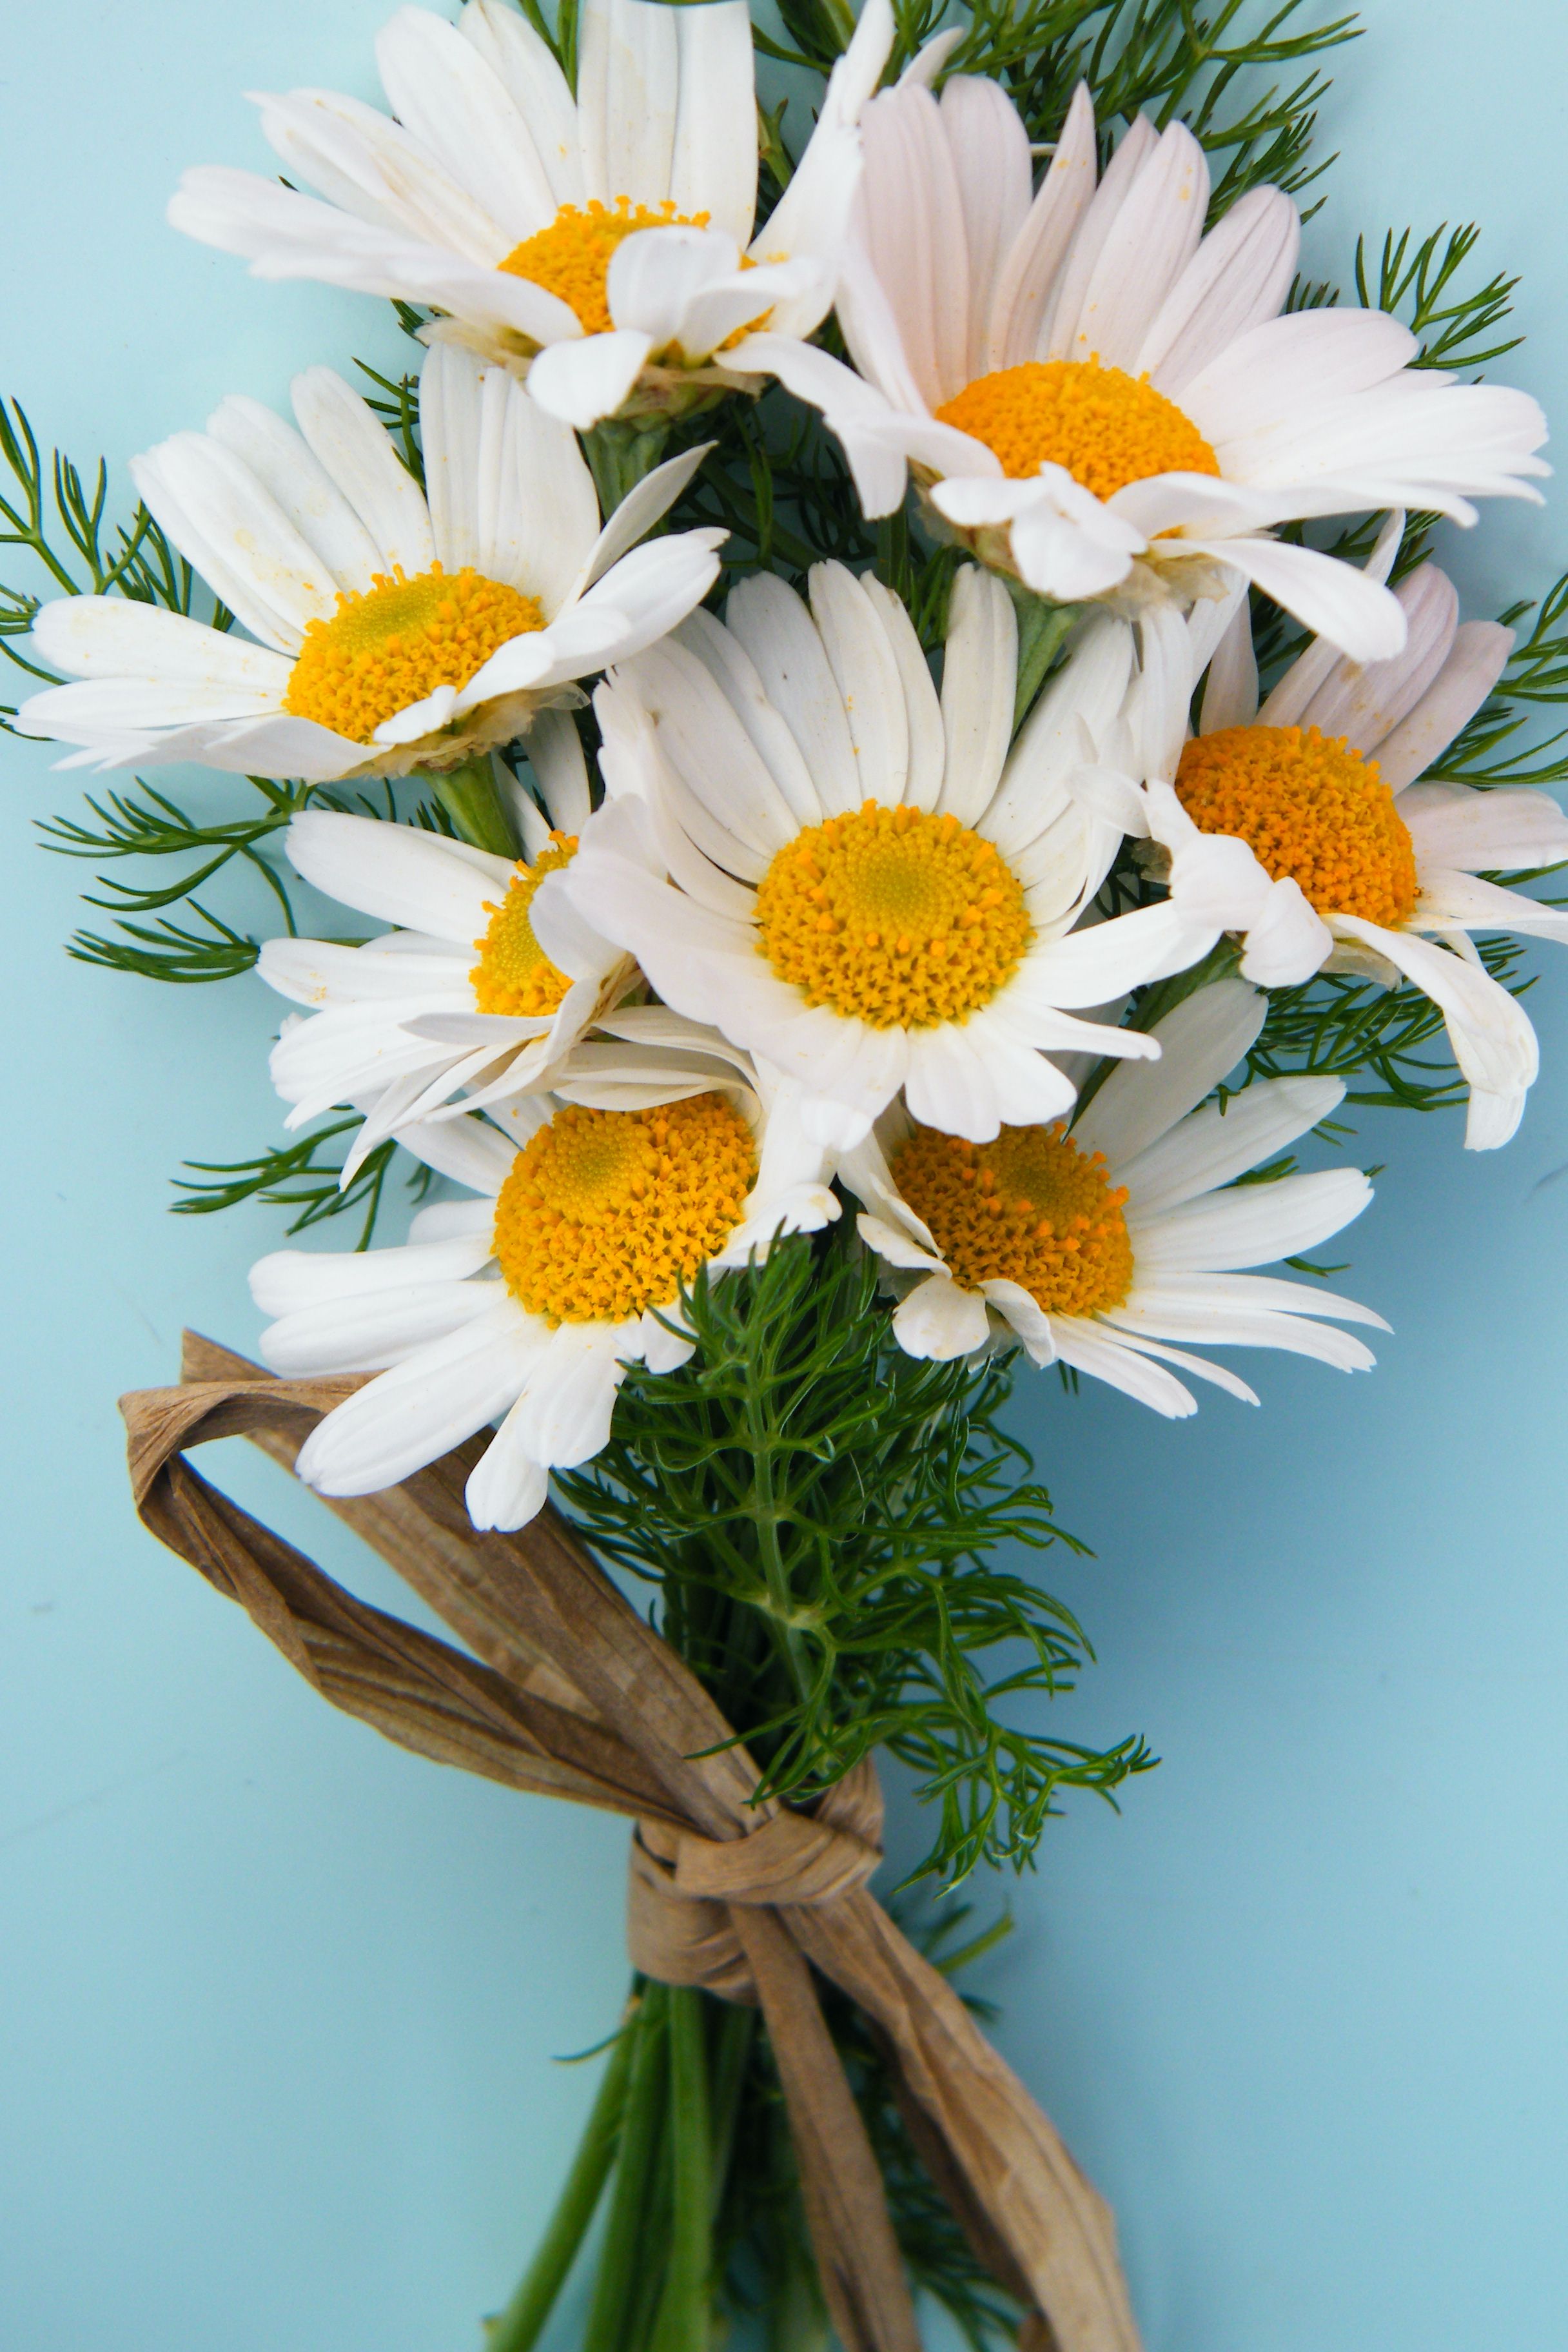 Bunch of daisies photo